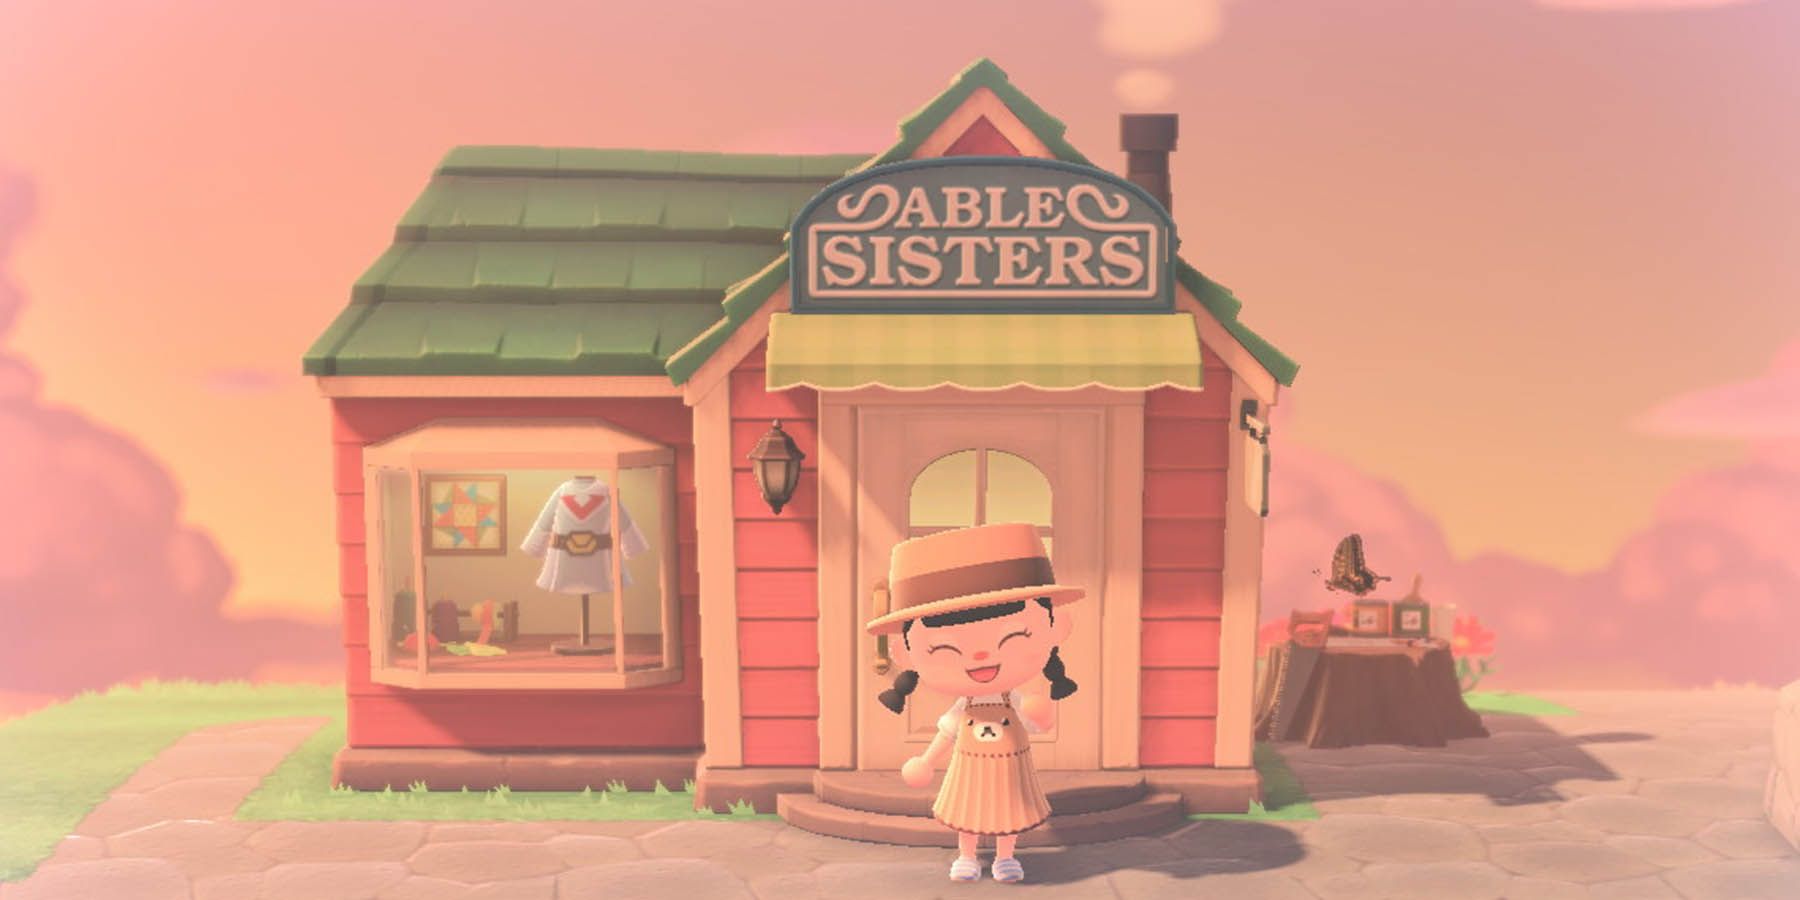 Able Sisters shop sunset Animal Crossing